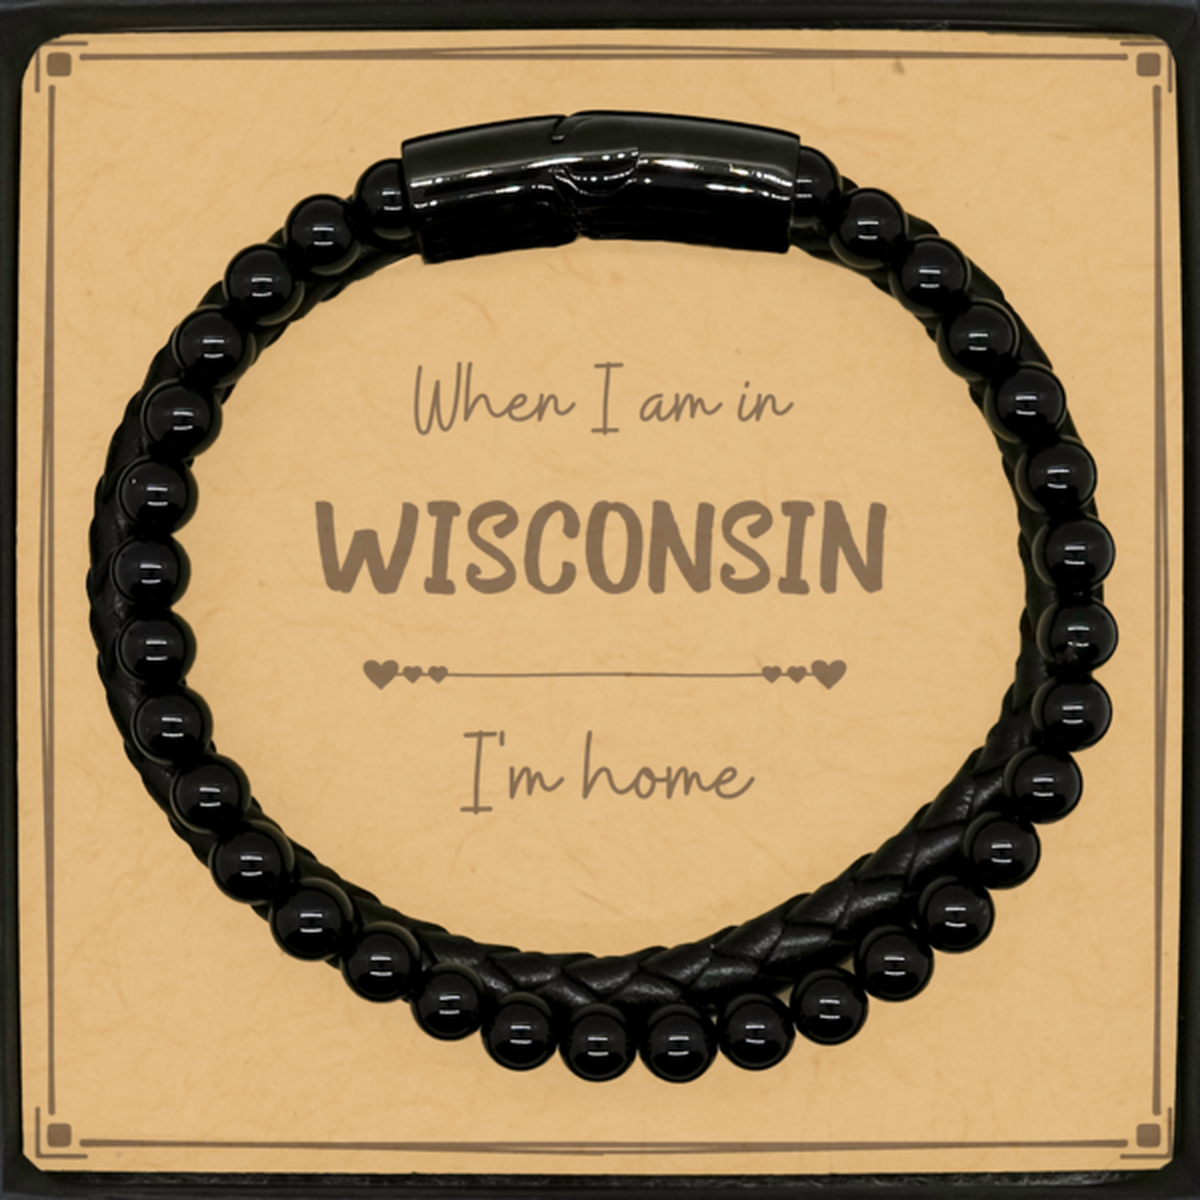 When I am in Wisconsin I'm home Stone Leather Bracelets, Message Card Gifts For Wisconsin, State Wisconsin Birthday Gifts for Friends Coworker